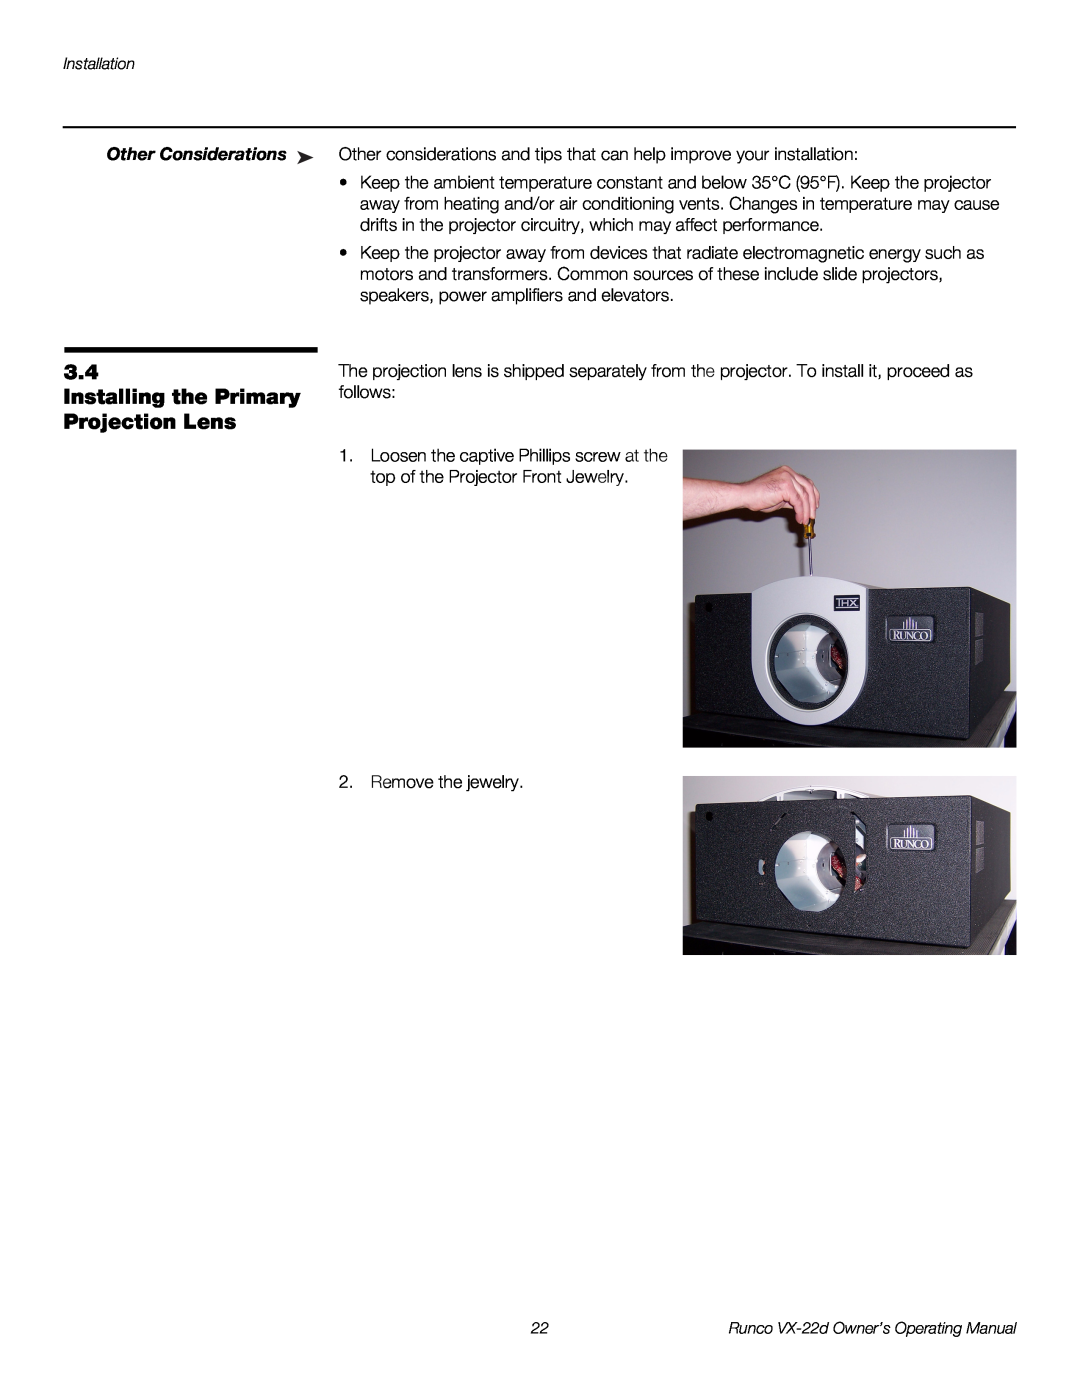 Runco VX-22D manual Installing the Primary Projection Lens, Other Considerations 